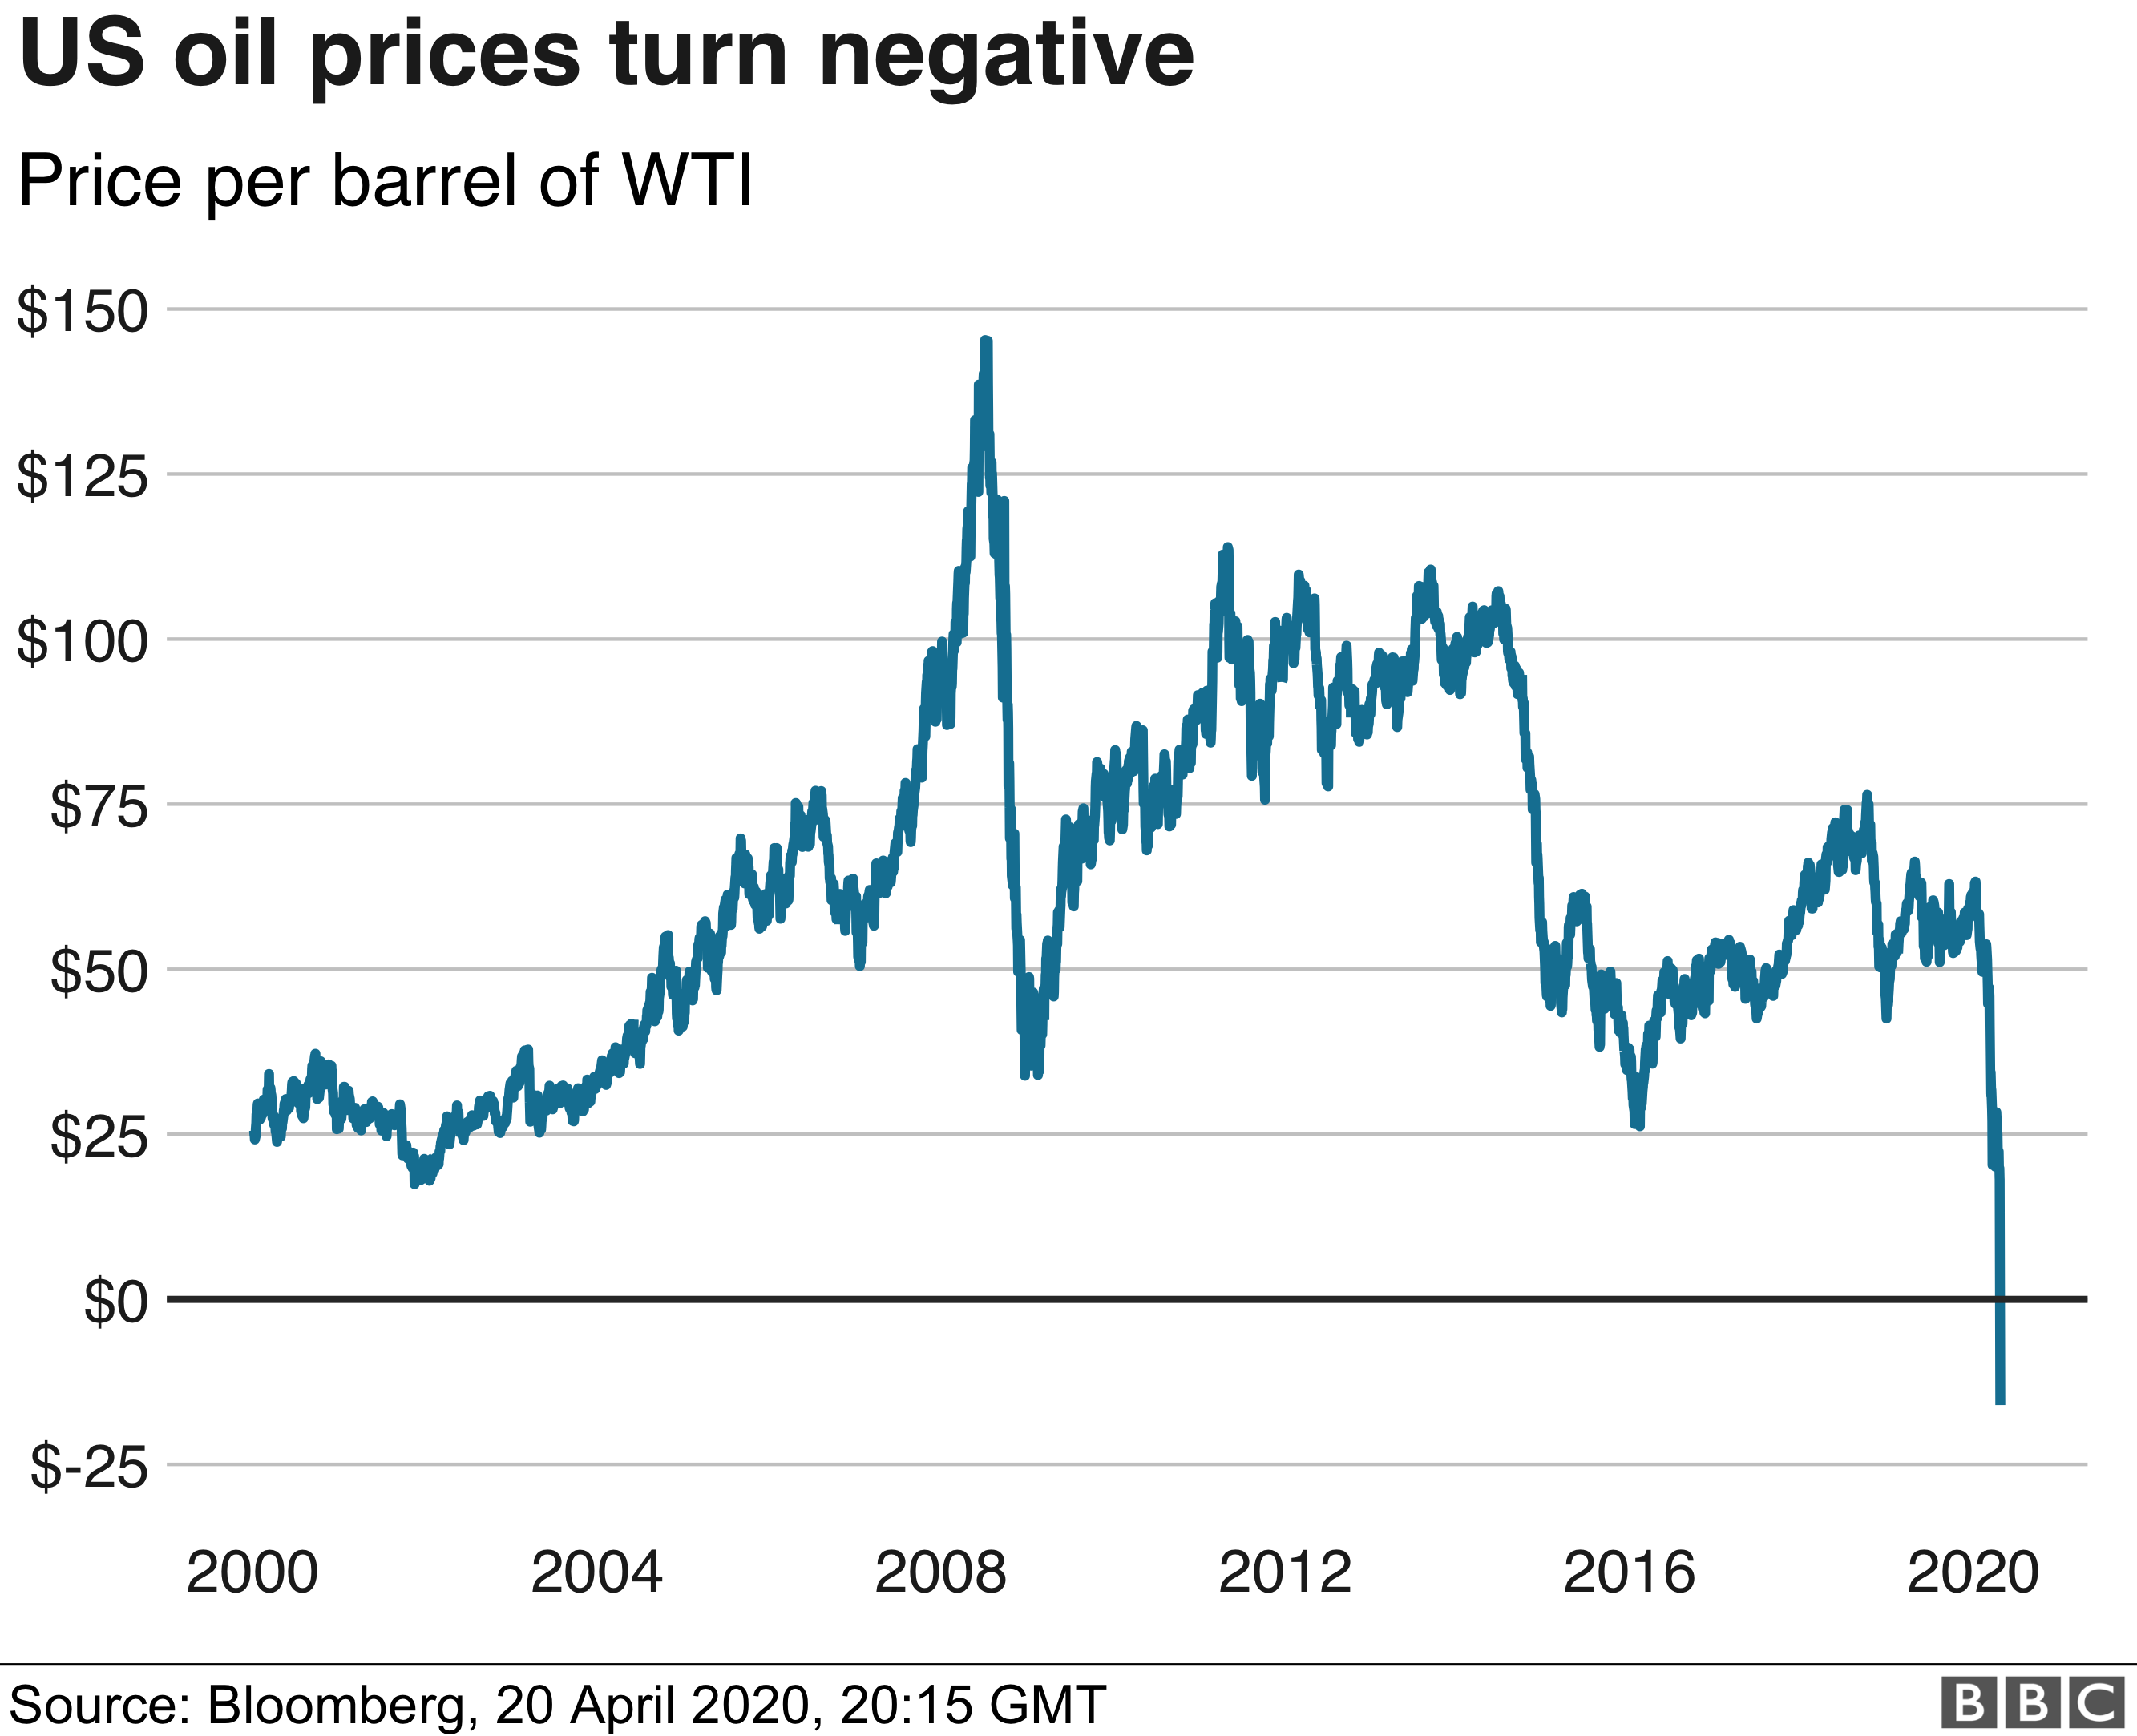 Oil price chart from 2000 to 2020